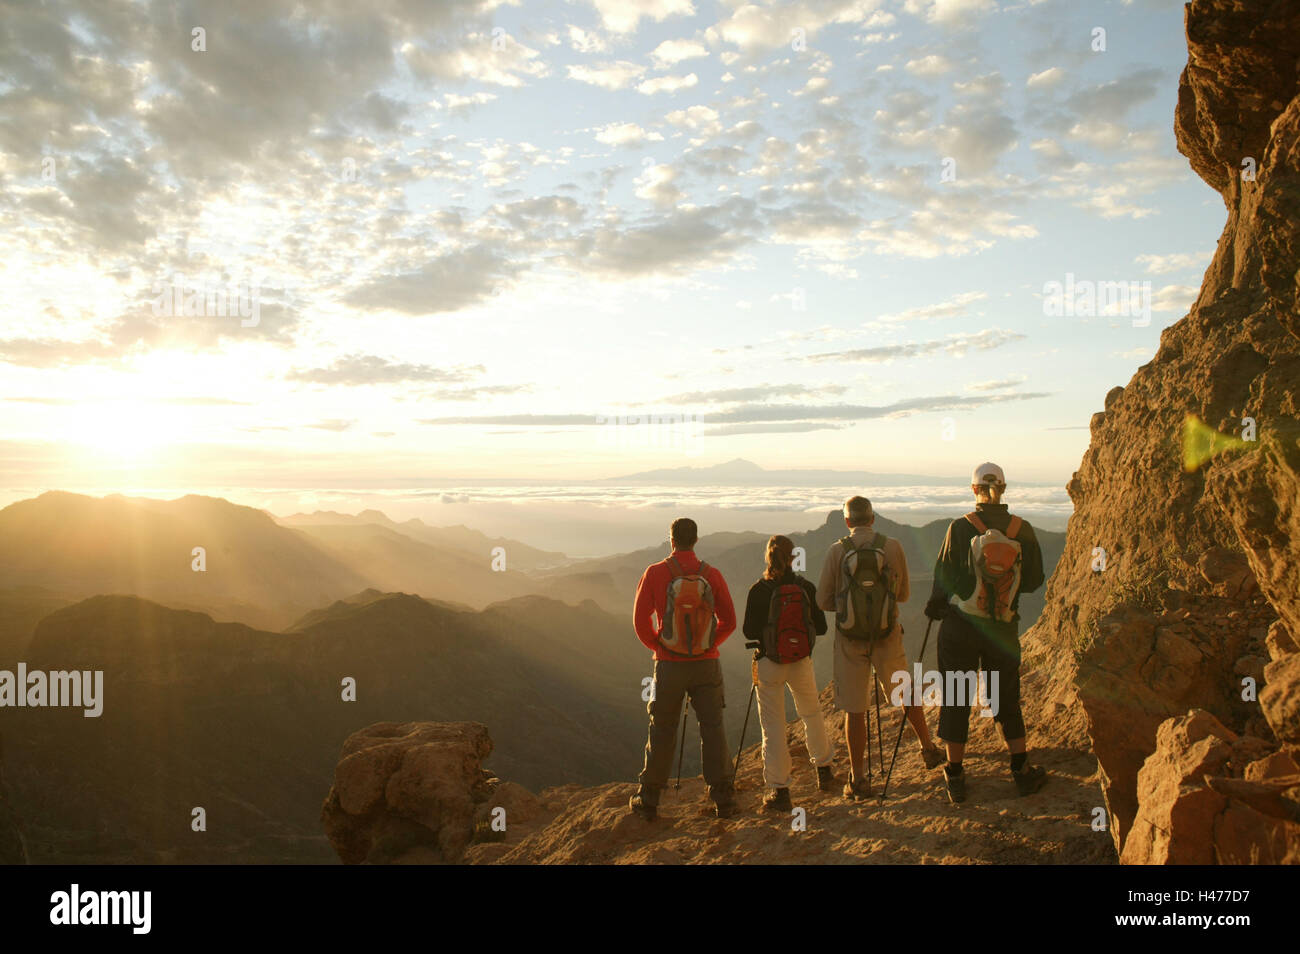 Traveling-group, standing, back view, rocks, pause, mountain scenery, evening-mood Stock Photo